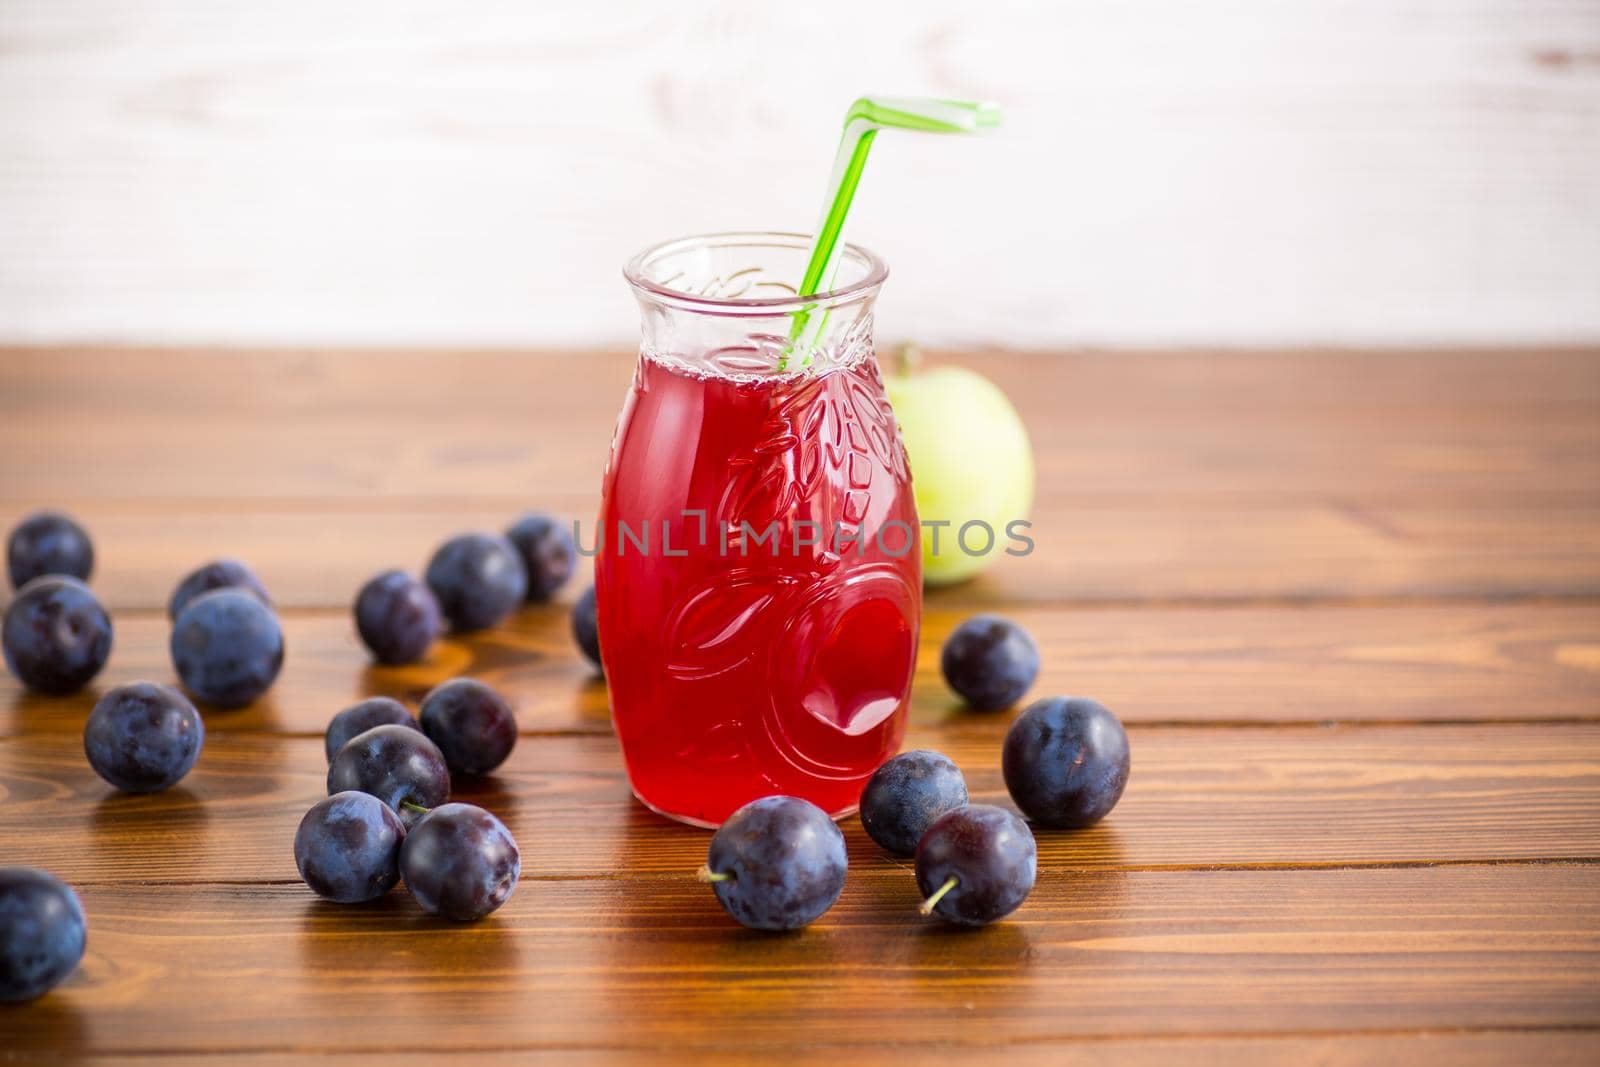 Sweet natural plum drink in a glass with a straw on a wooden table